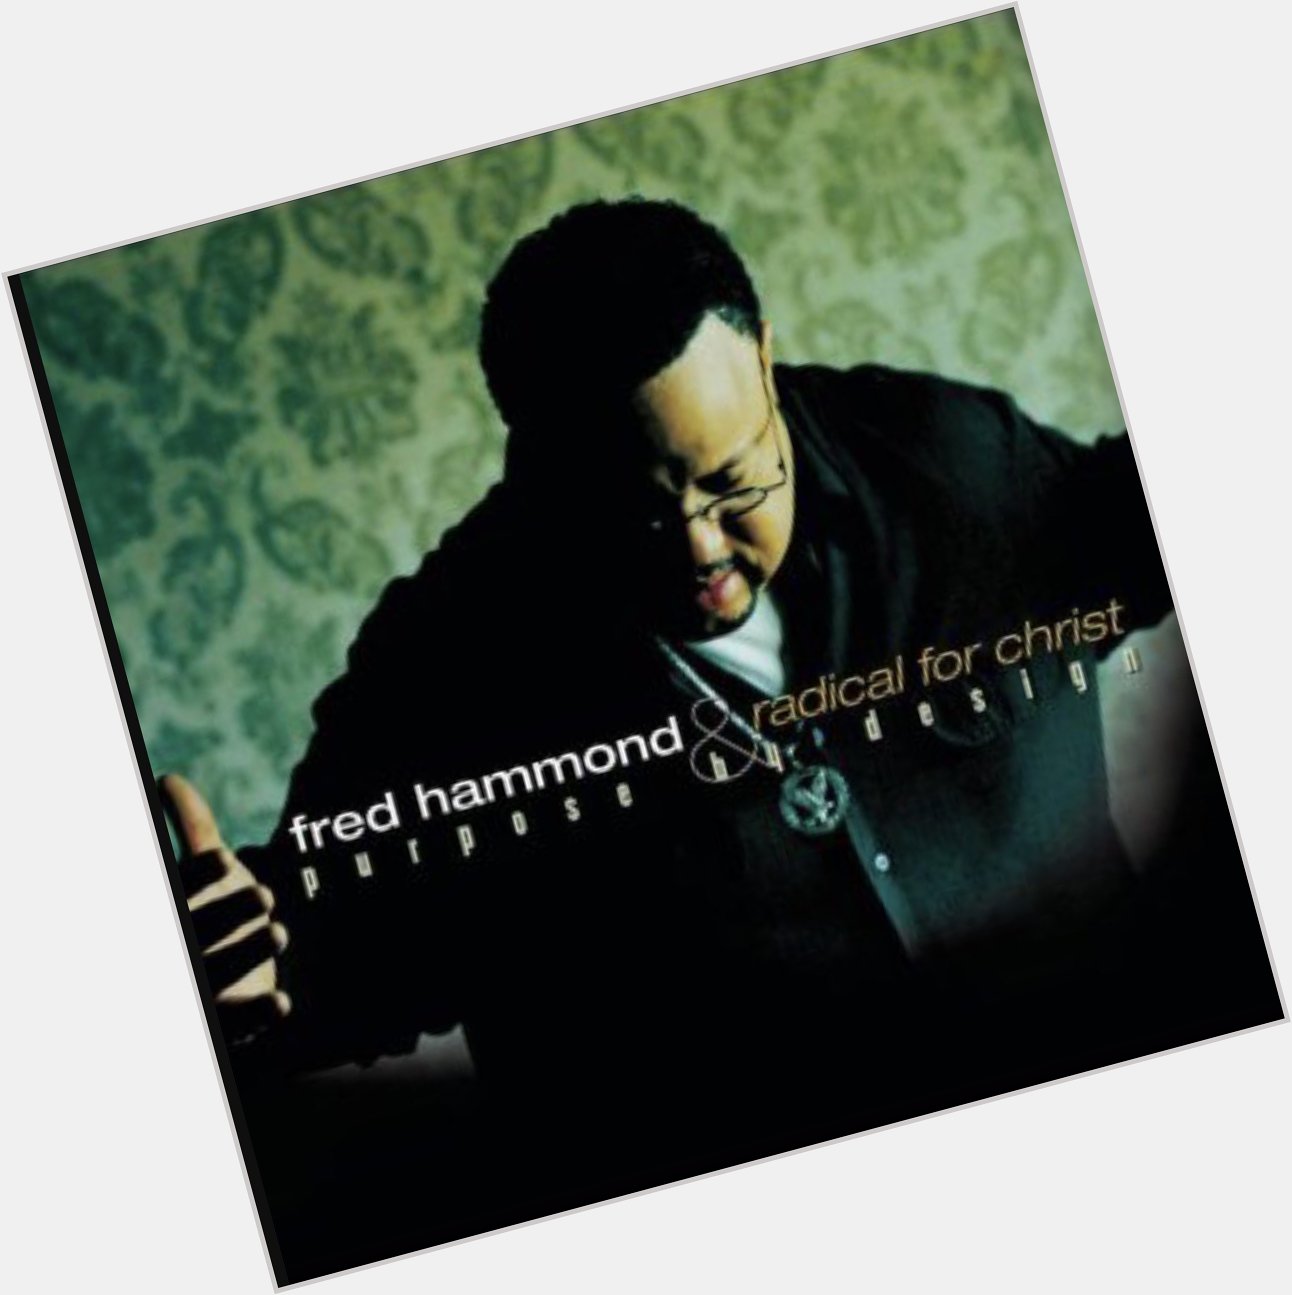 Happy birthday Fred Hammond!! This album right here was part of the soundtrack of my childhood    